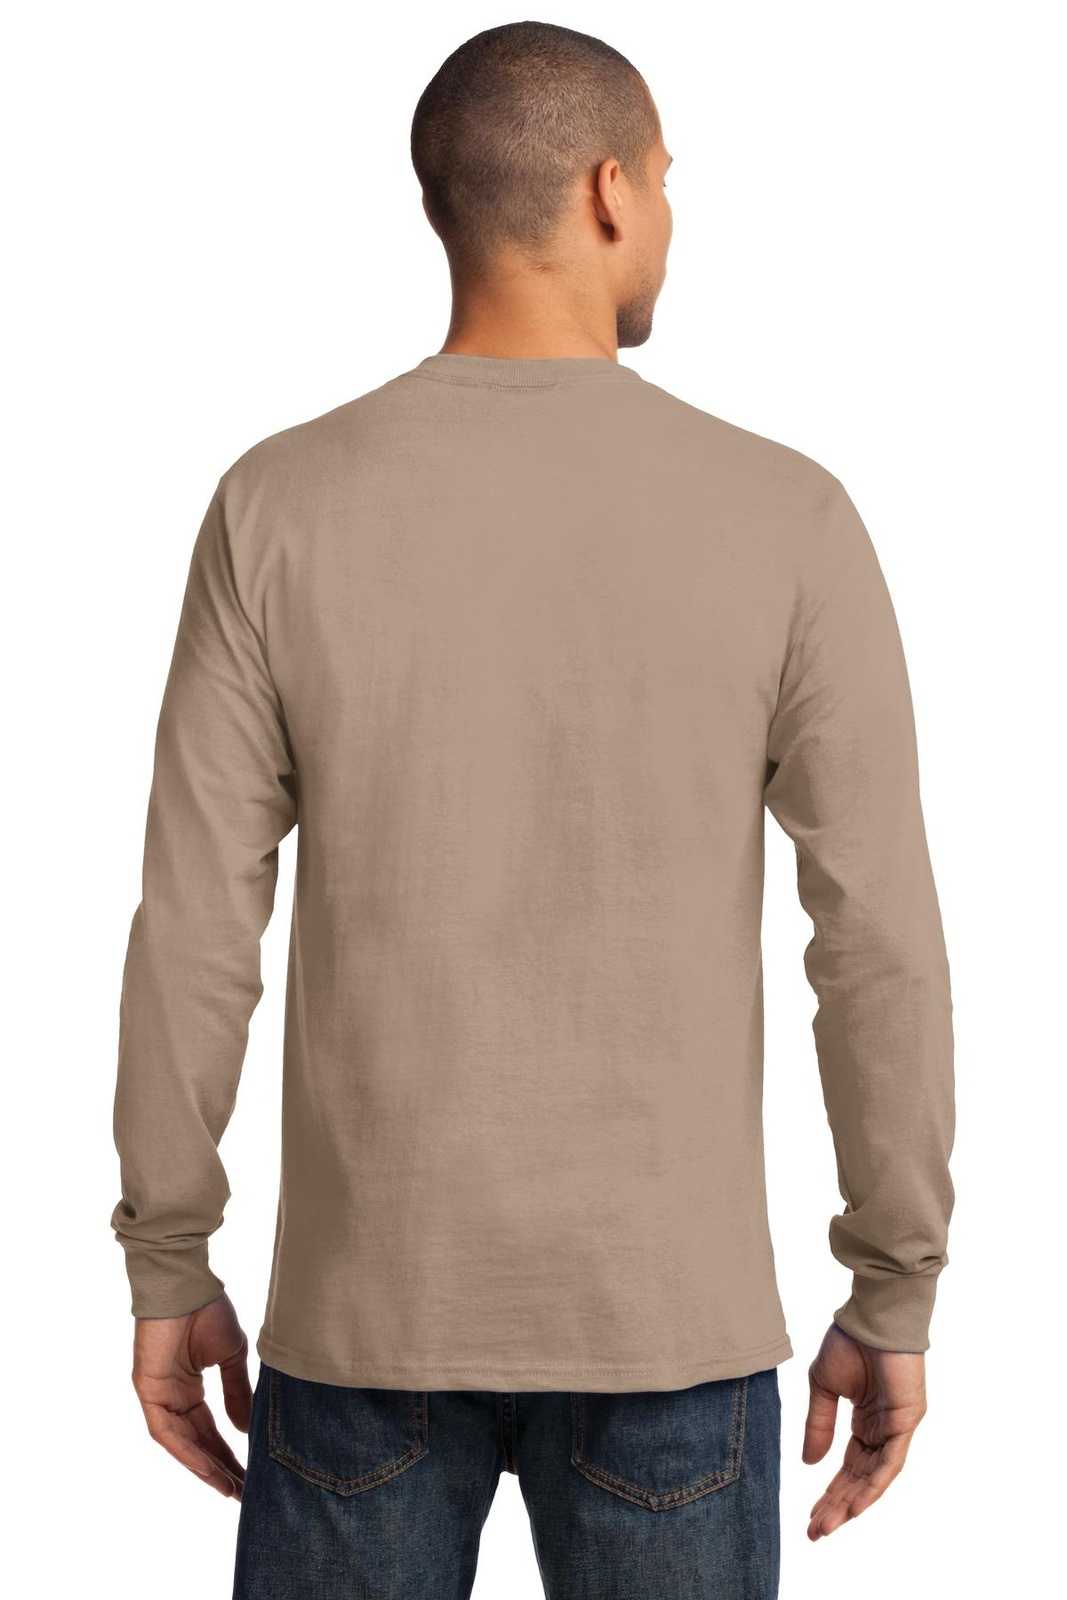 Port & Company PC61LS Long Sleeve Essential Tee - Sand - HIT a Double - 1